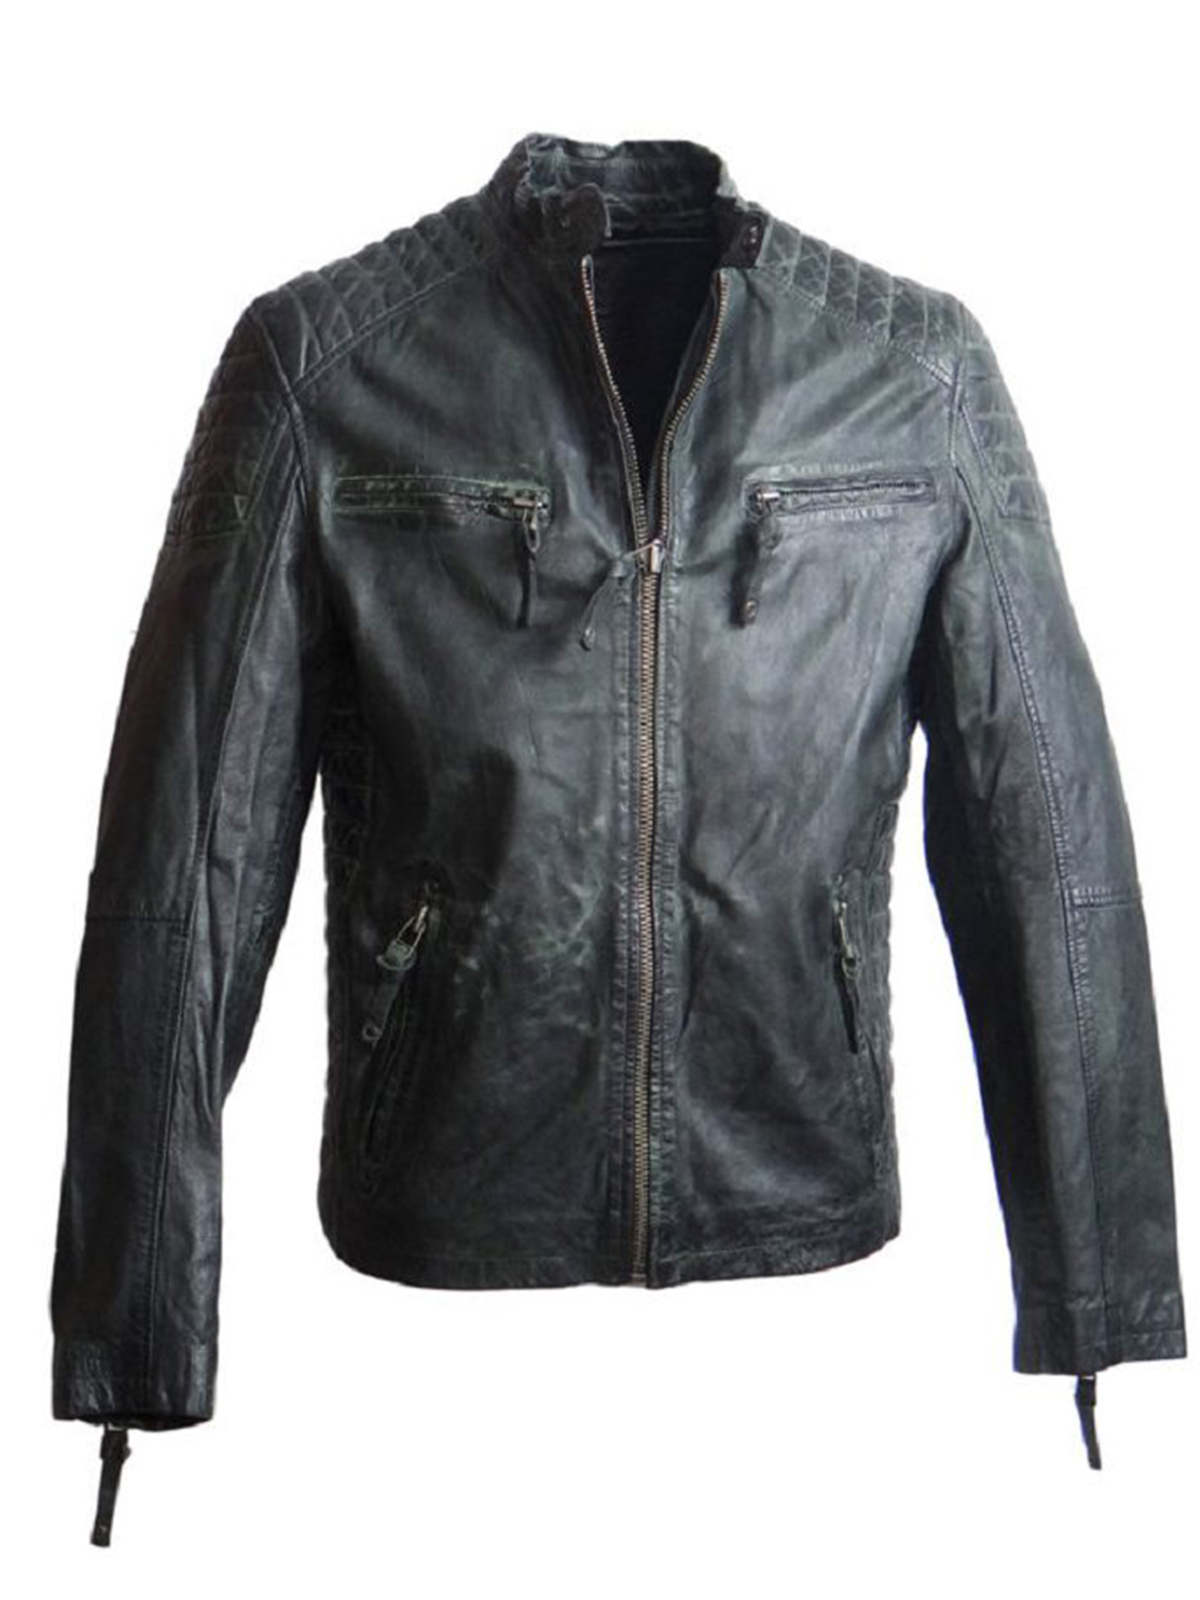 Men's Used Look Leather Jacket